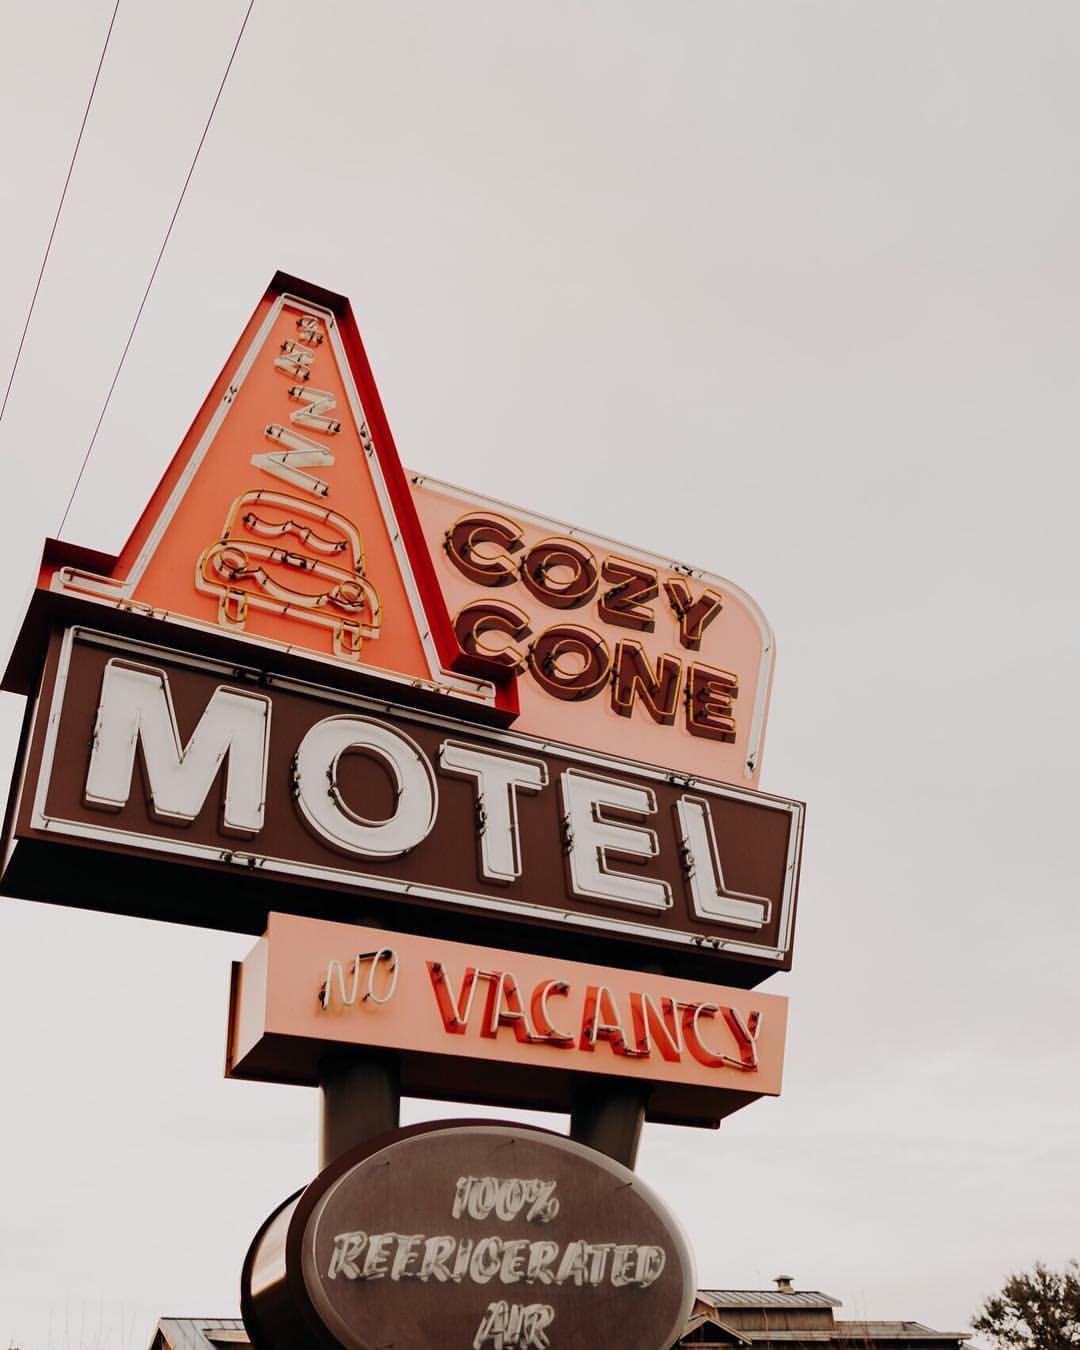 Cozy Cone Logo - Wishing I was able to check into the Cozy Cone Motel right about now ...